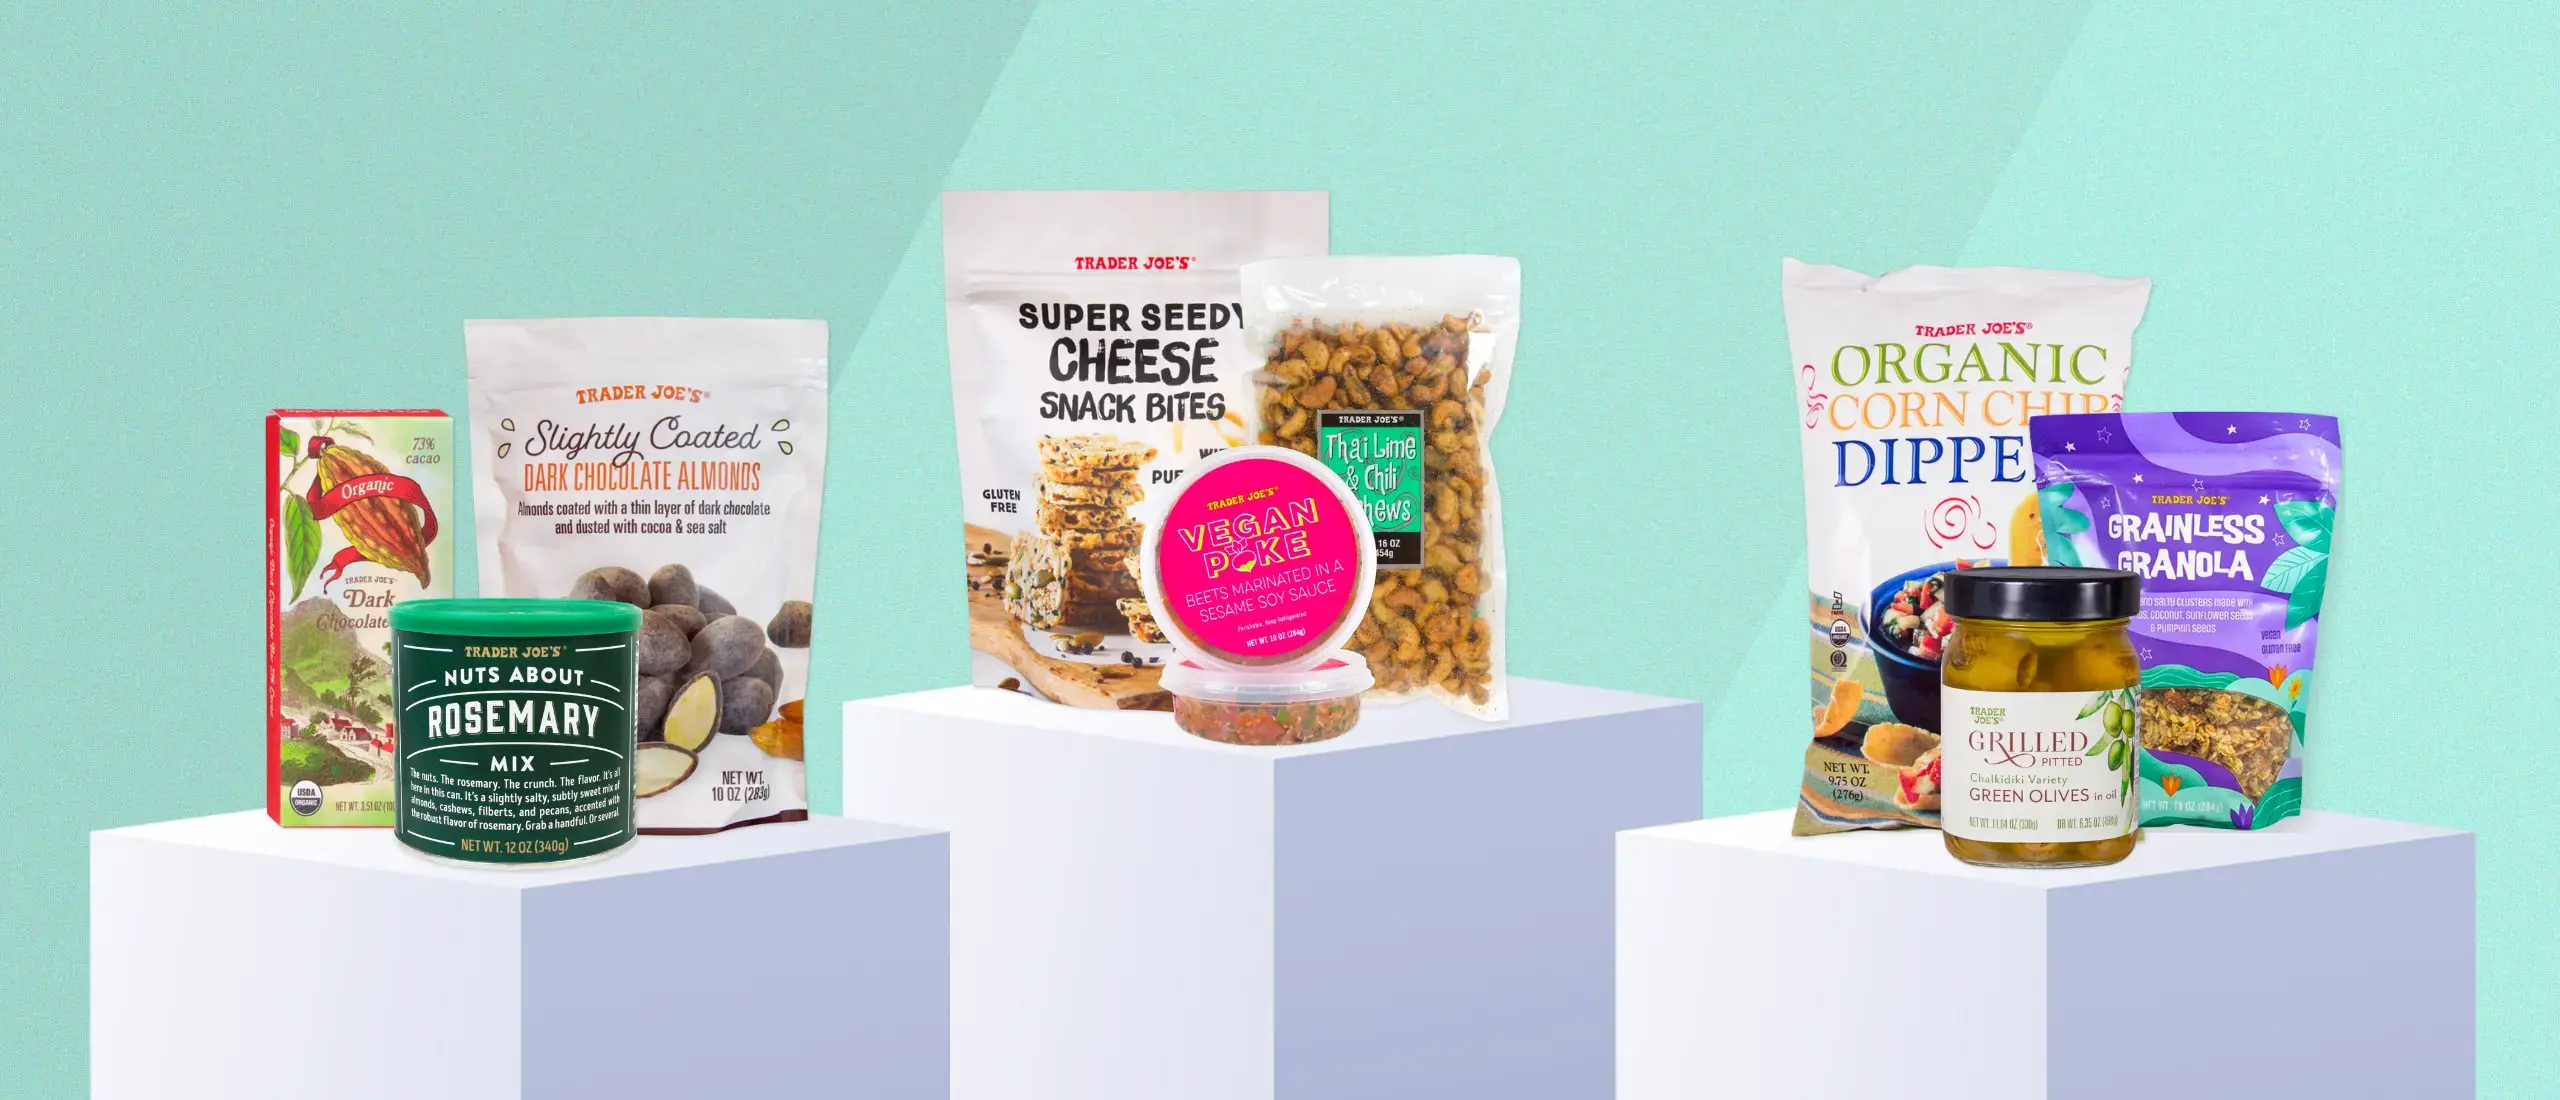 25 Best Trader Joe's Healthy Snacks, According to an R.D.